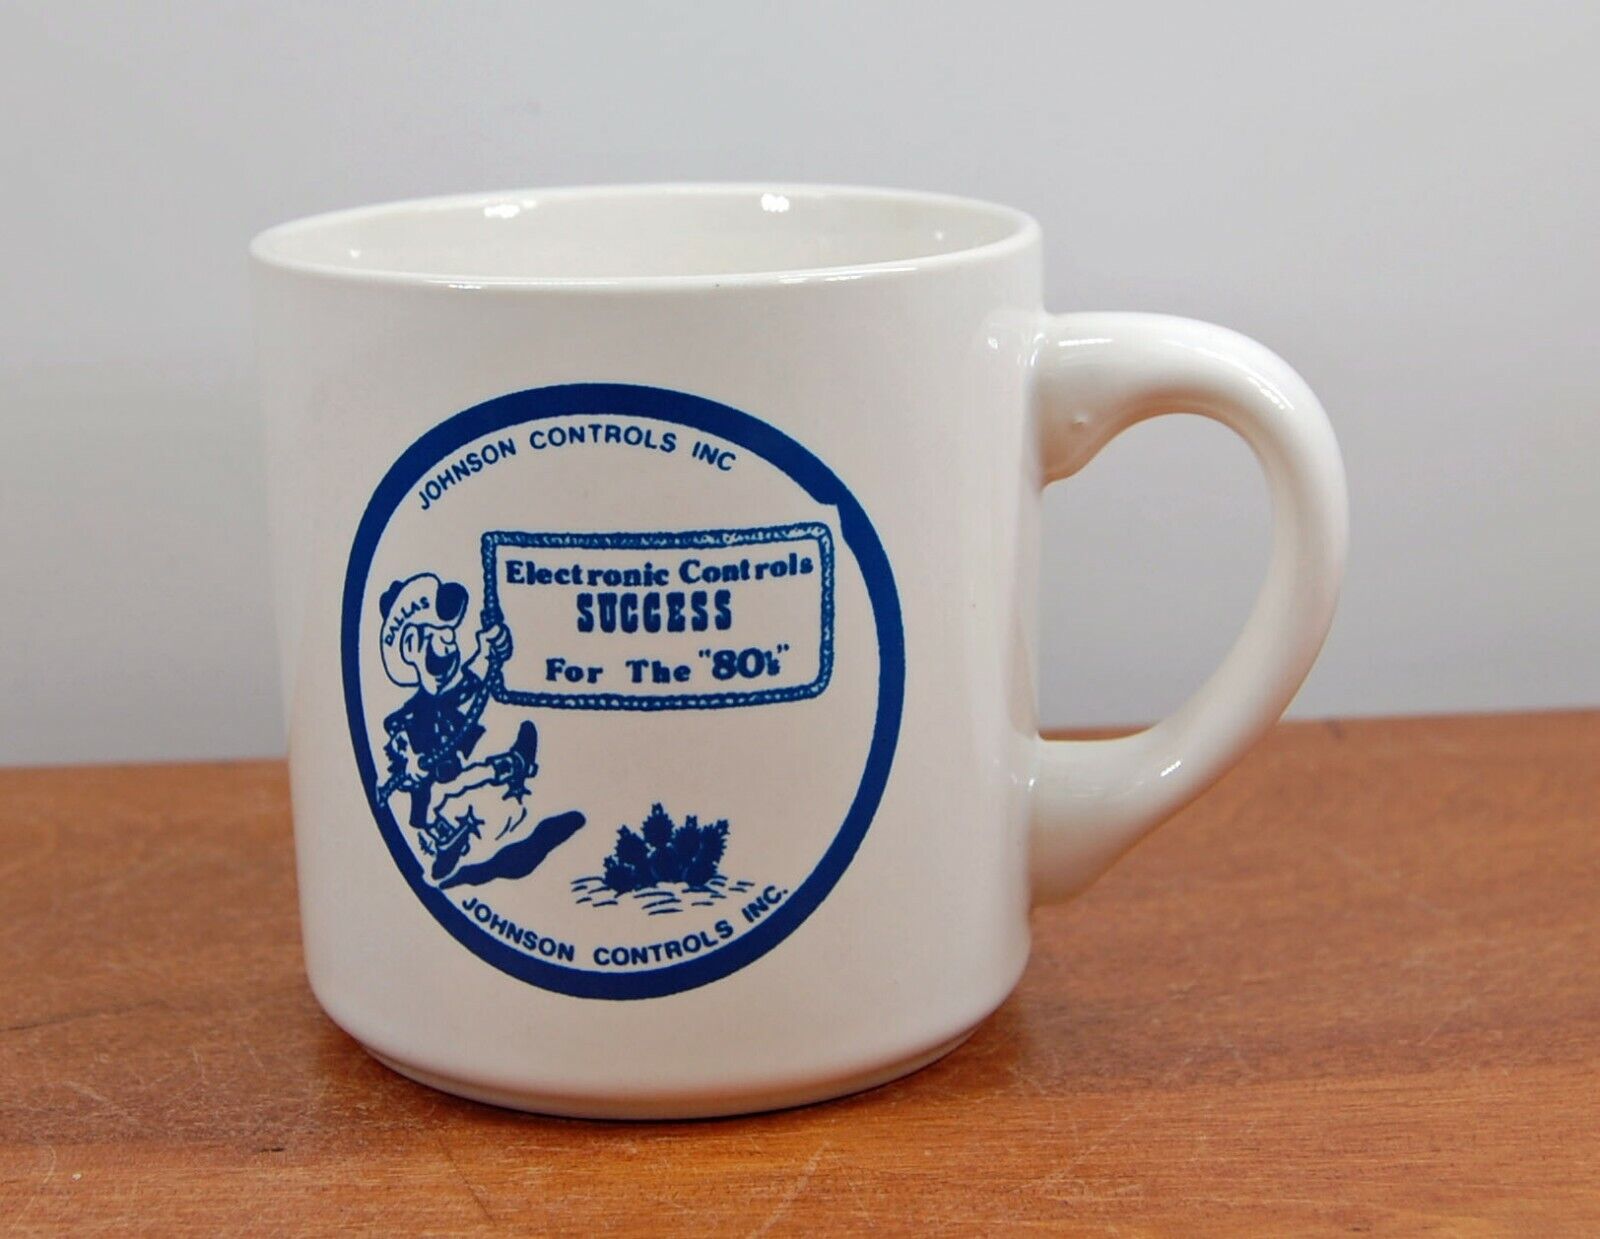 Johnson Controls Electronic Controls Success for the 1980s Coffee Mug Cup Dallas